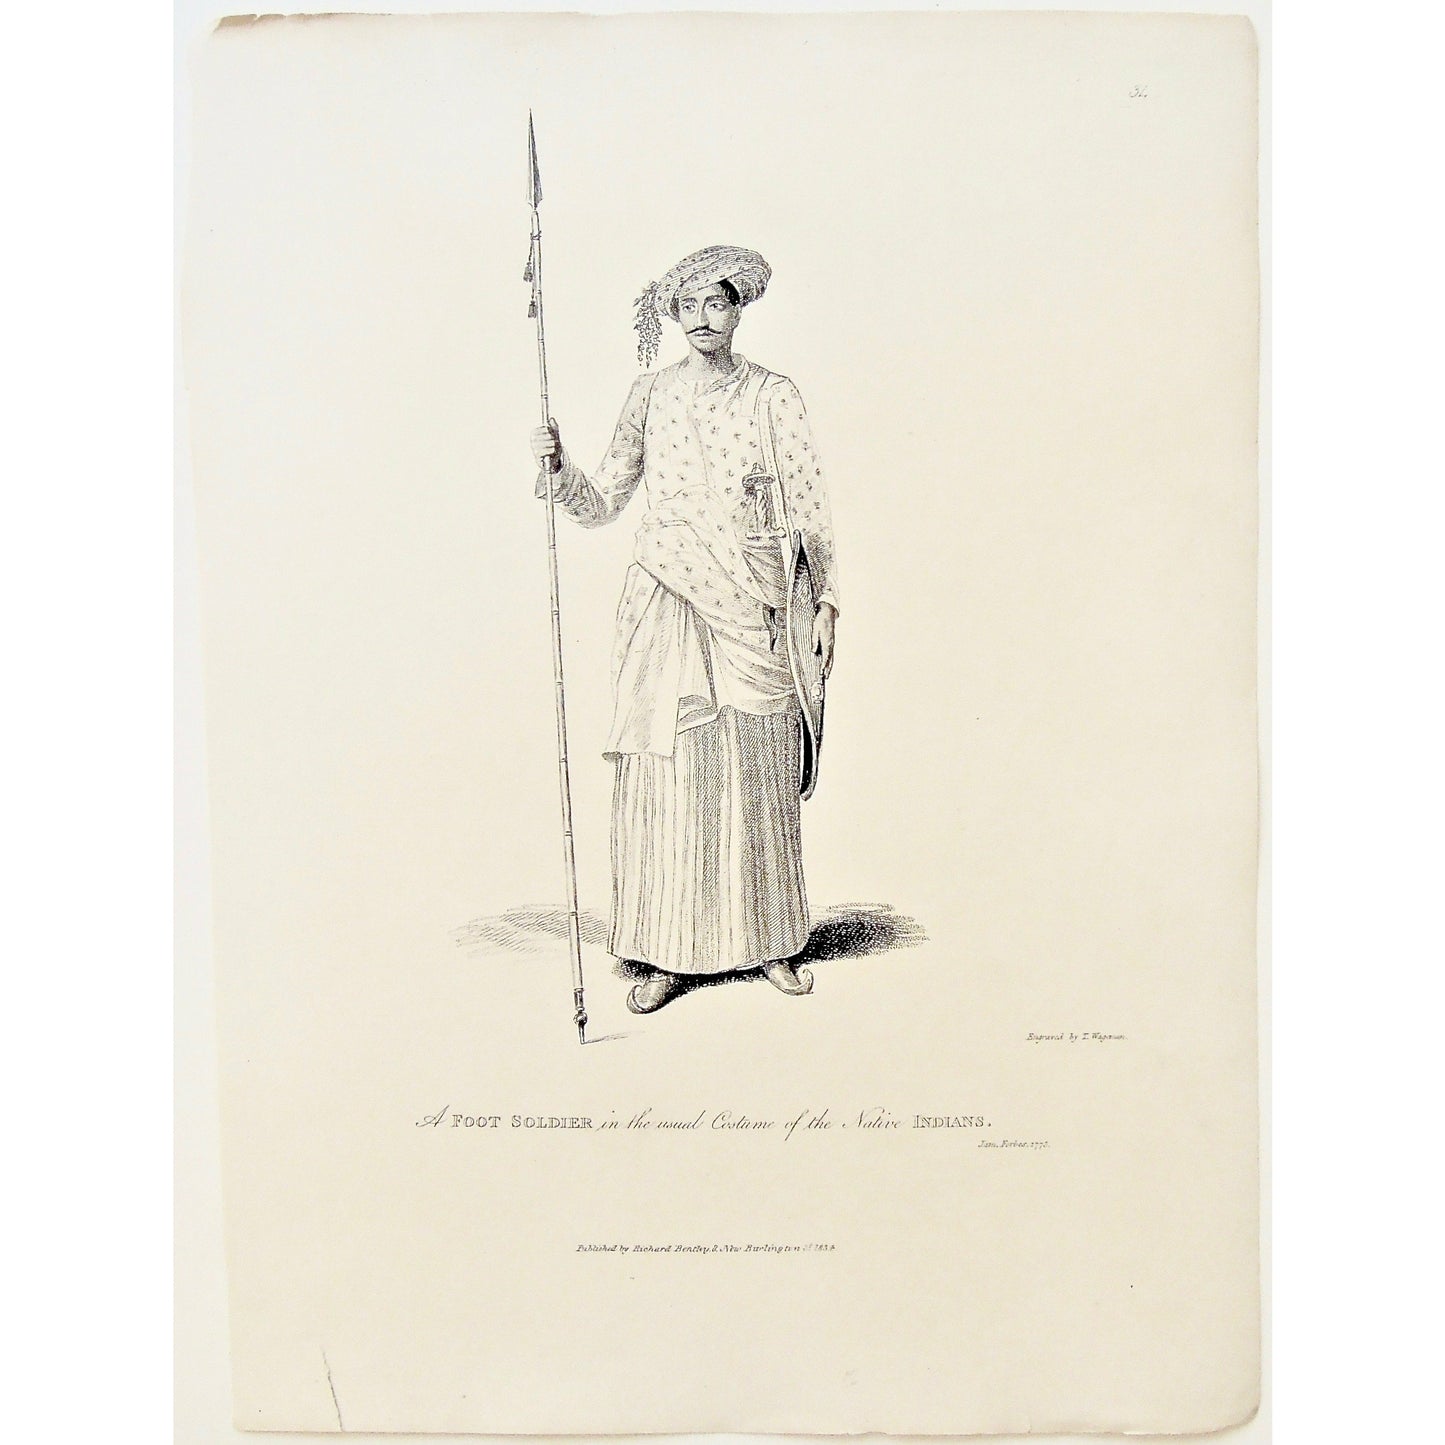 Foot Soldier, Soldier, Casual Costume, Costume, Casual, Native Indians, India, Dress, Attire, Clothing, Sword, Sheild, Dagger, head scrarf, James Forbes, Forbes, Eliza Rosée, Countess De Montalembert, Oriental Memoirs, Narrative of Seventeen Years Residence in India, Bentley, 8 New Burlington Street, London, Wageman, Nichols & Son, 25 Parliament Street, 1775, 1834, Steel engraving, Antique Print, Antique Prints, Vintage, Prints, Printmaking, Original, Rare, Rare books, Unique, Collectable, Art, Wall decor,